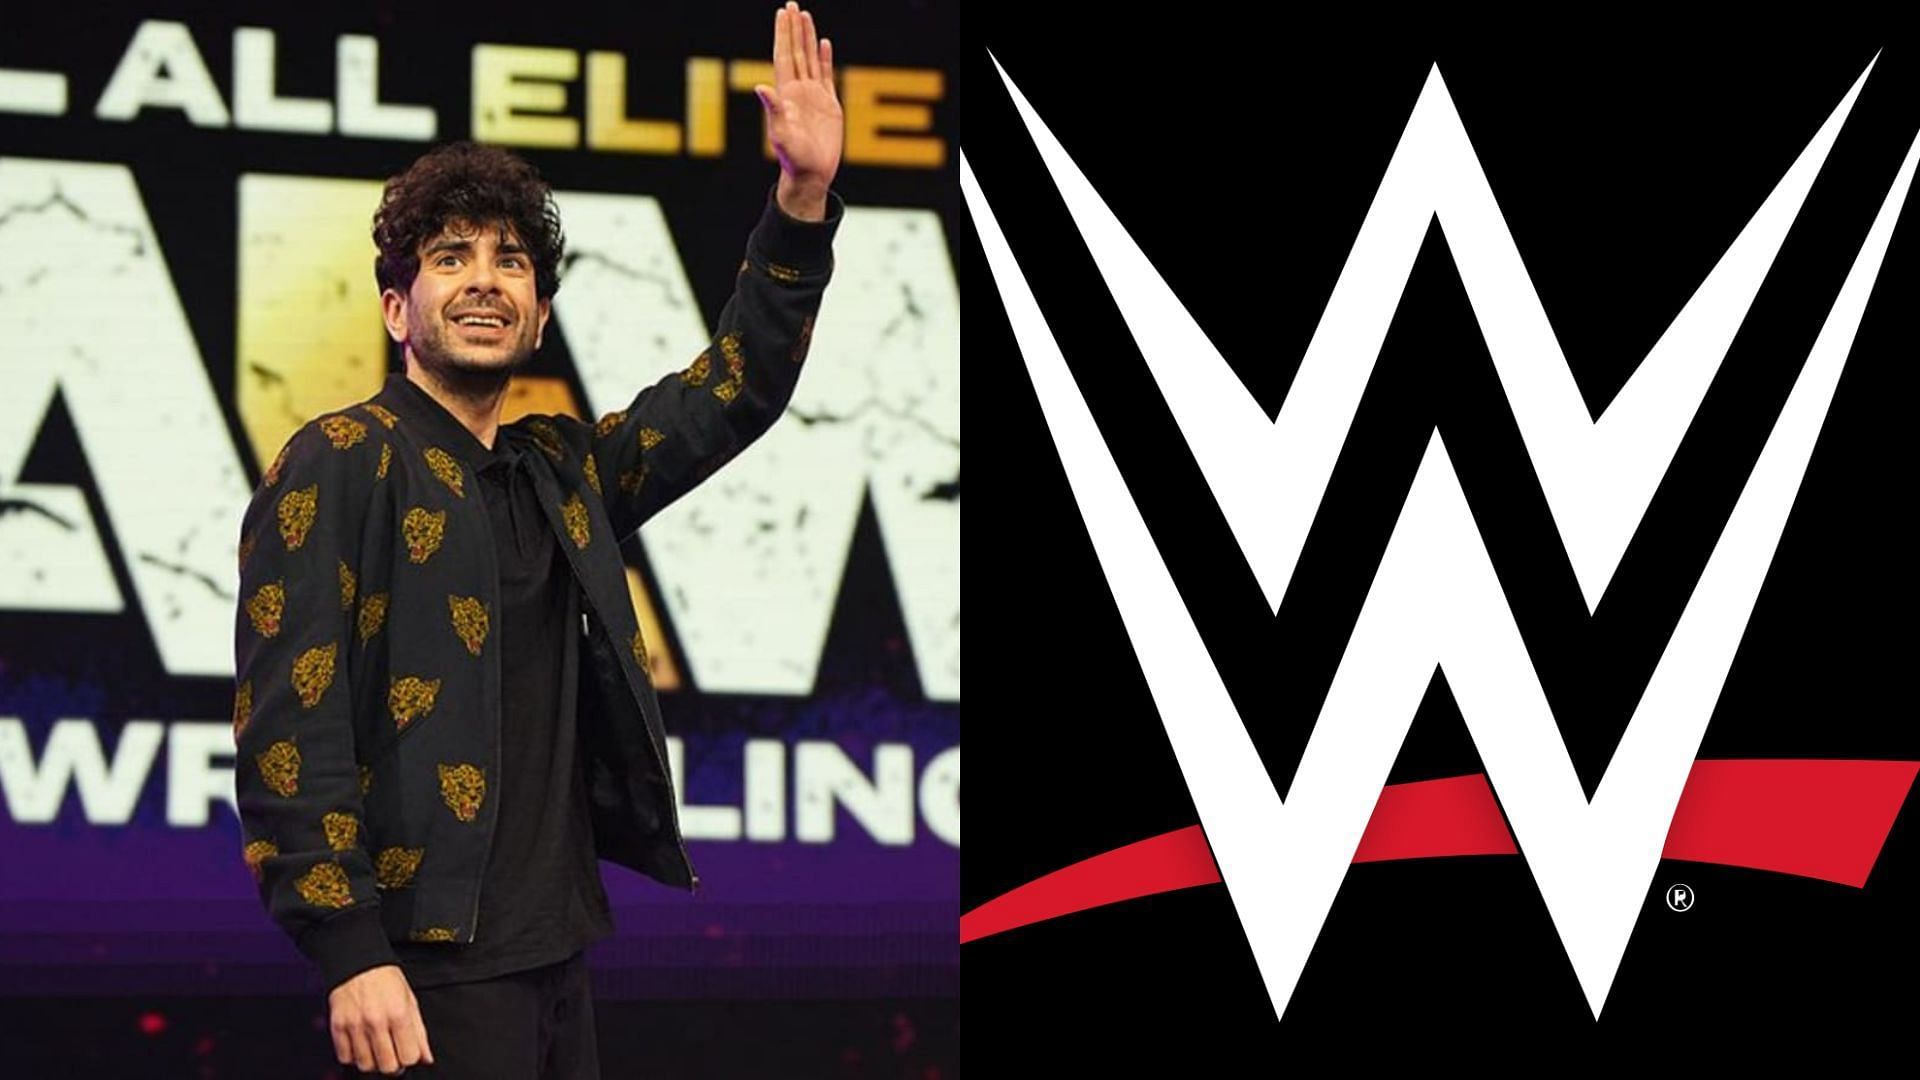 Tony Khan announced the signing of a WWE Hall of Famer